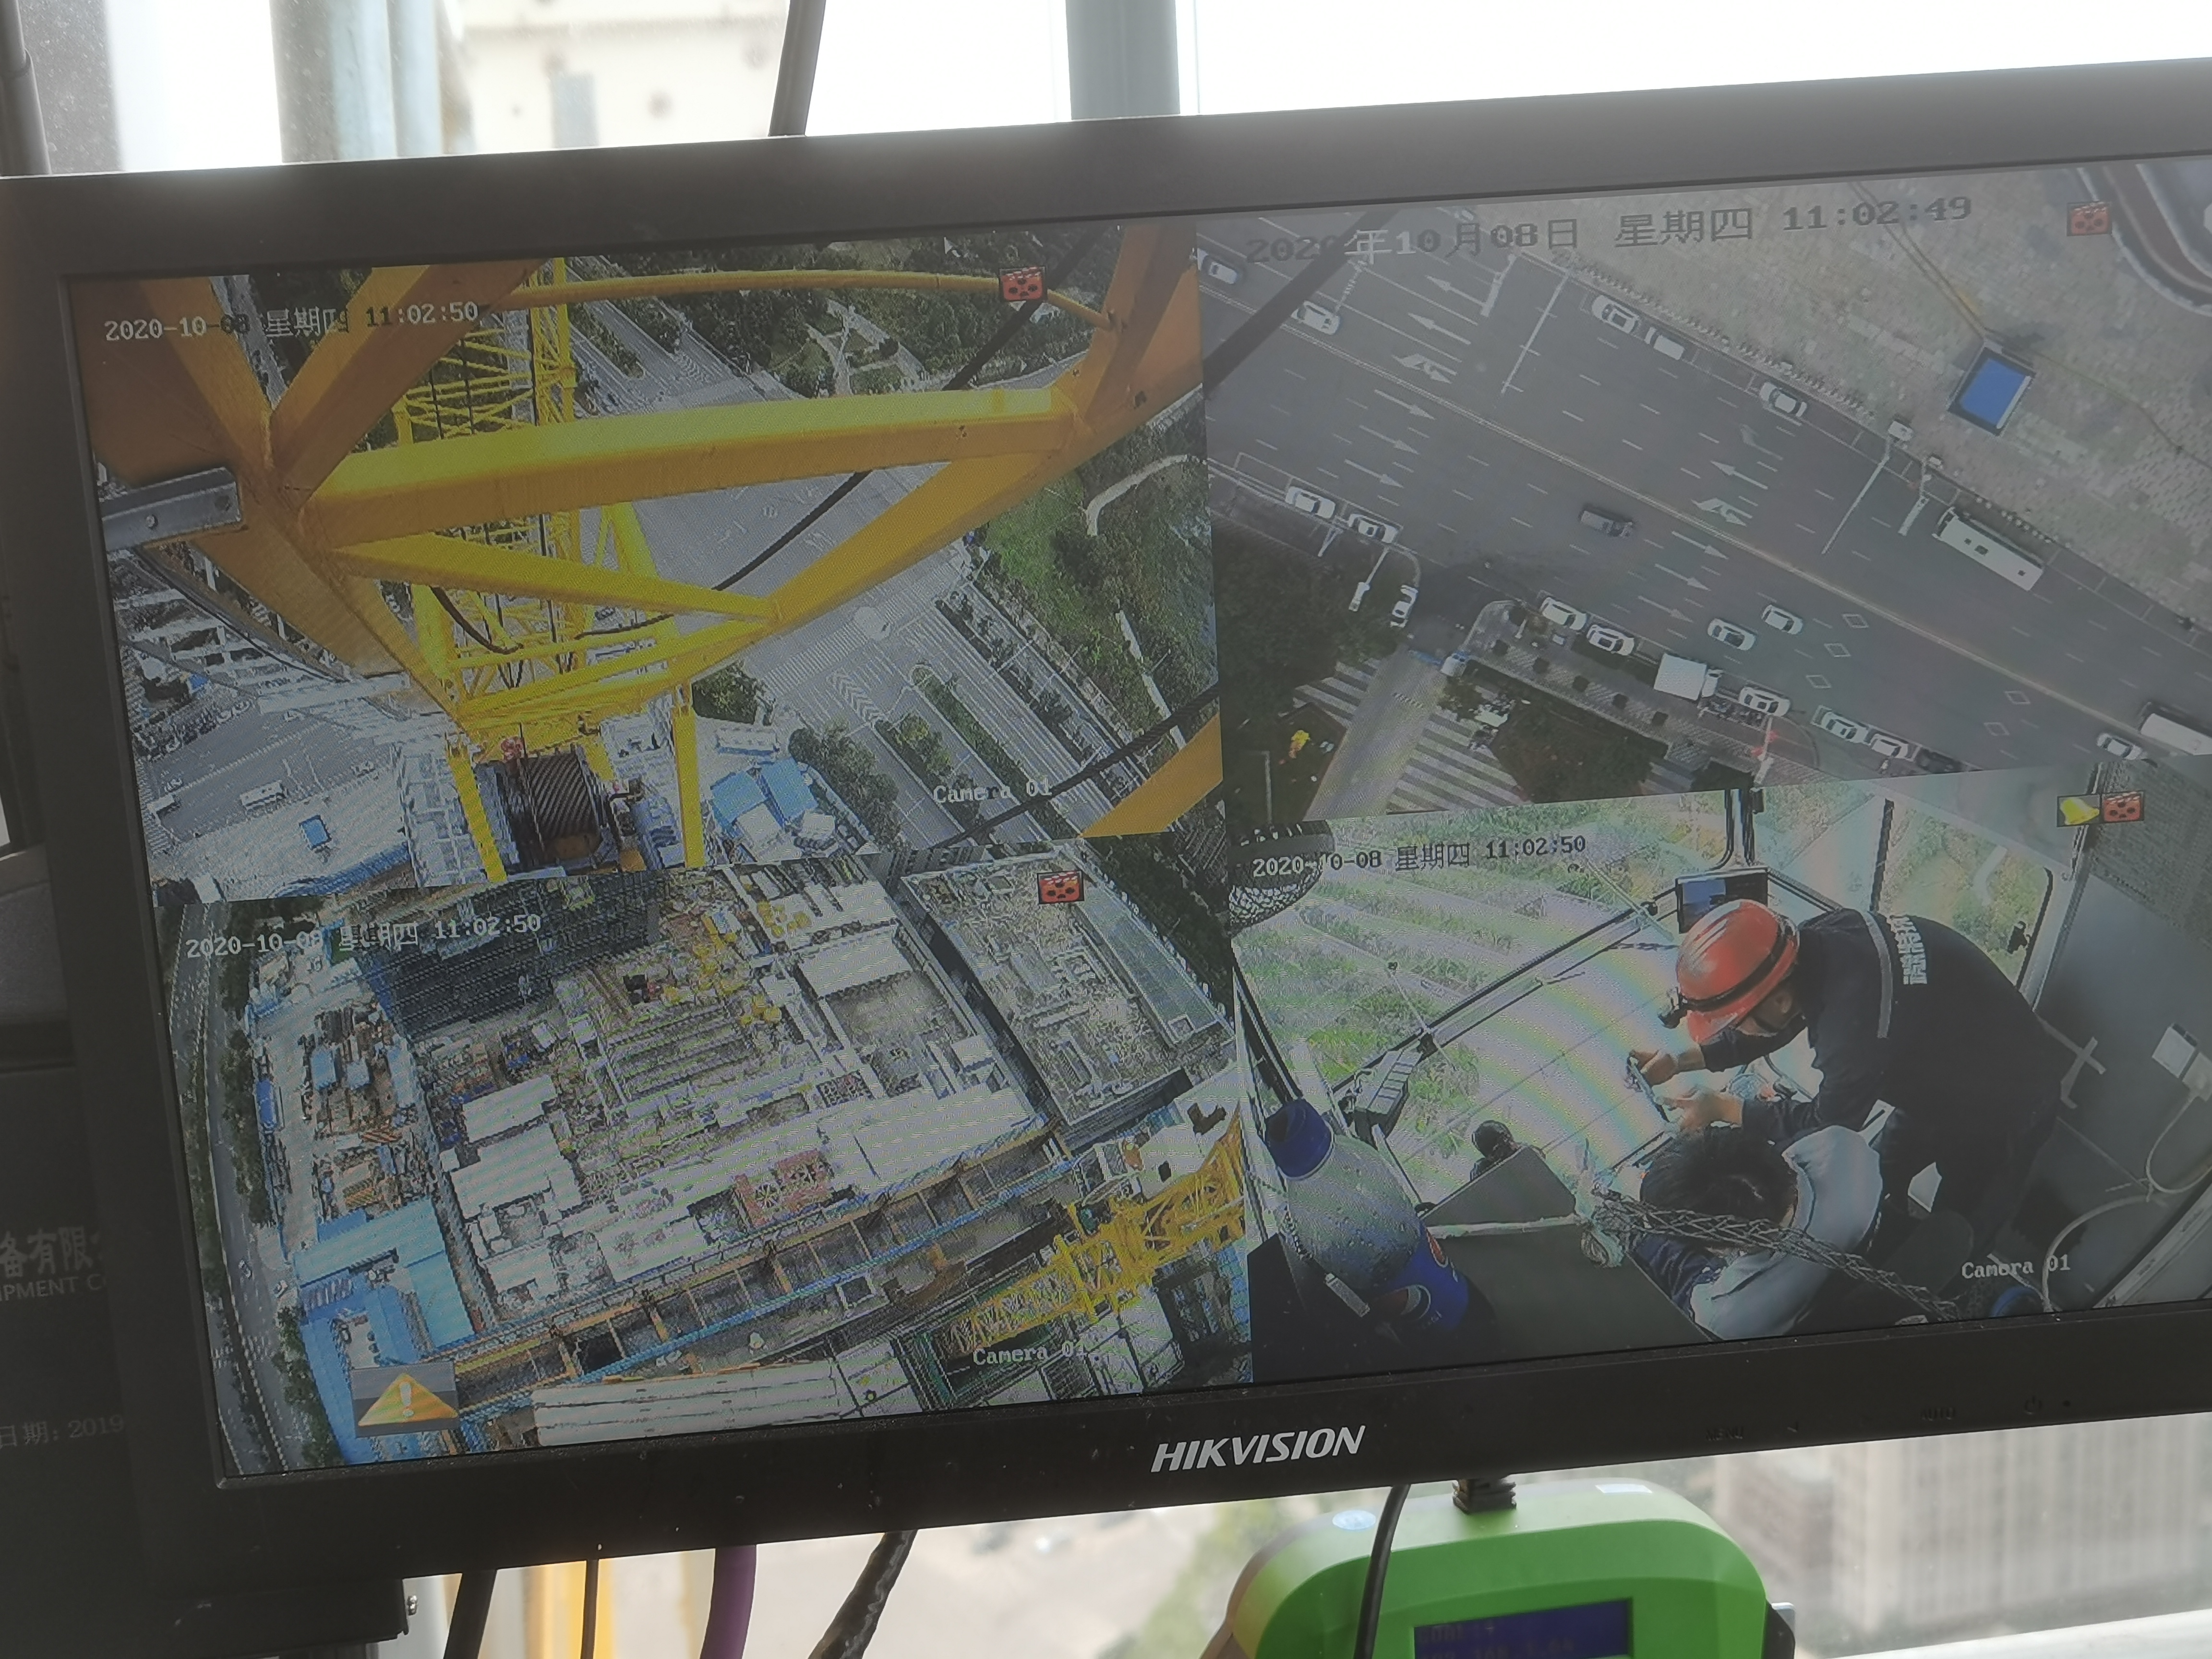 Through the video monitoring in the cab, we can see that the engineers of Weite are working